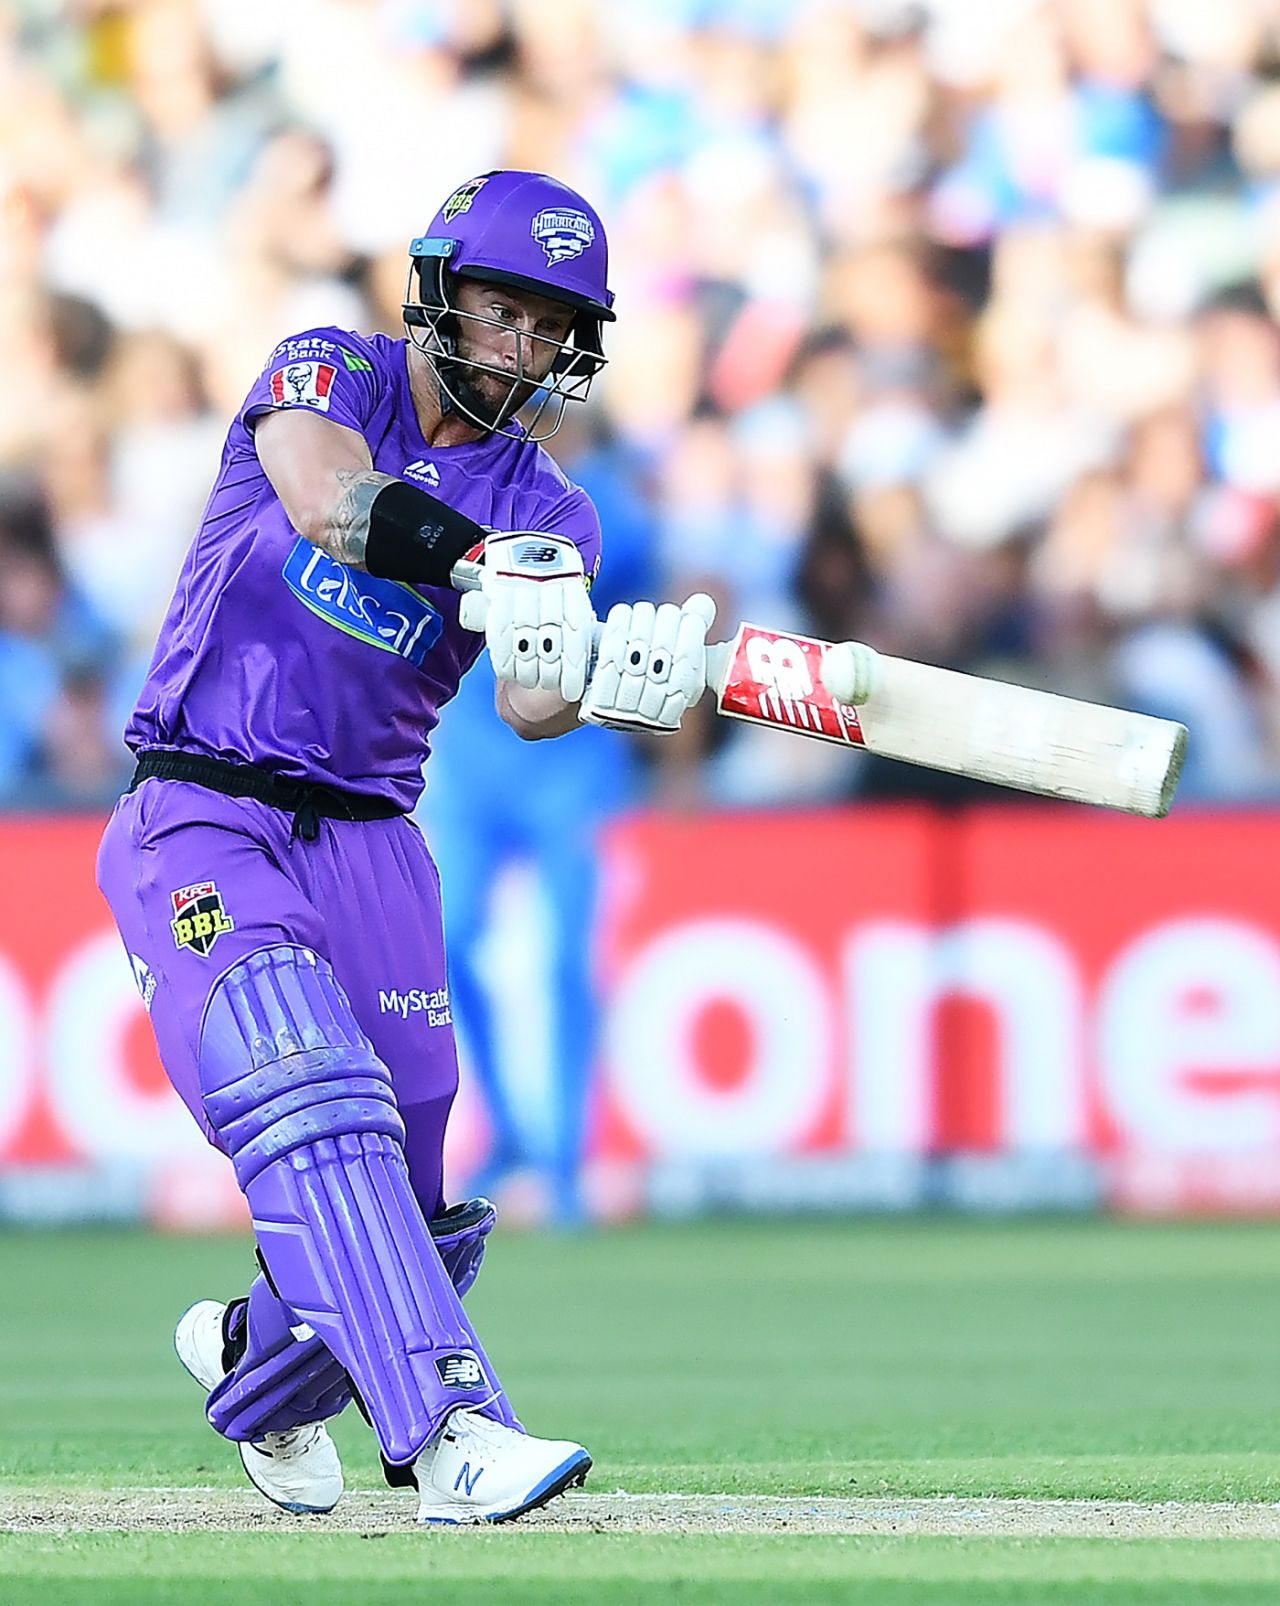 Matthew Wade was in blistering form, Adelaide Strikers v Hobart Hurricanes, Big Bash League 2019-20, Adelaide, January 26, 2020